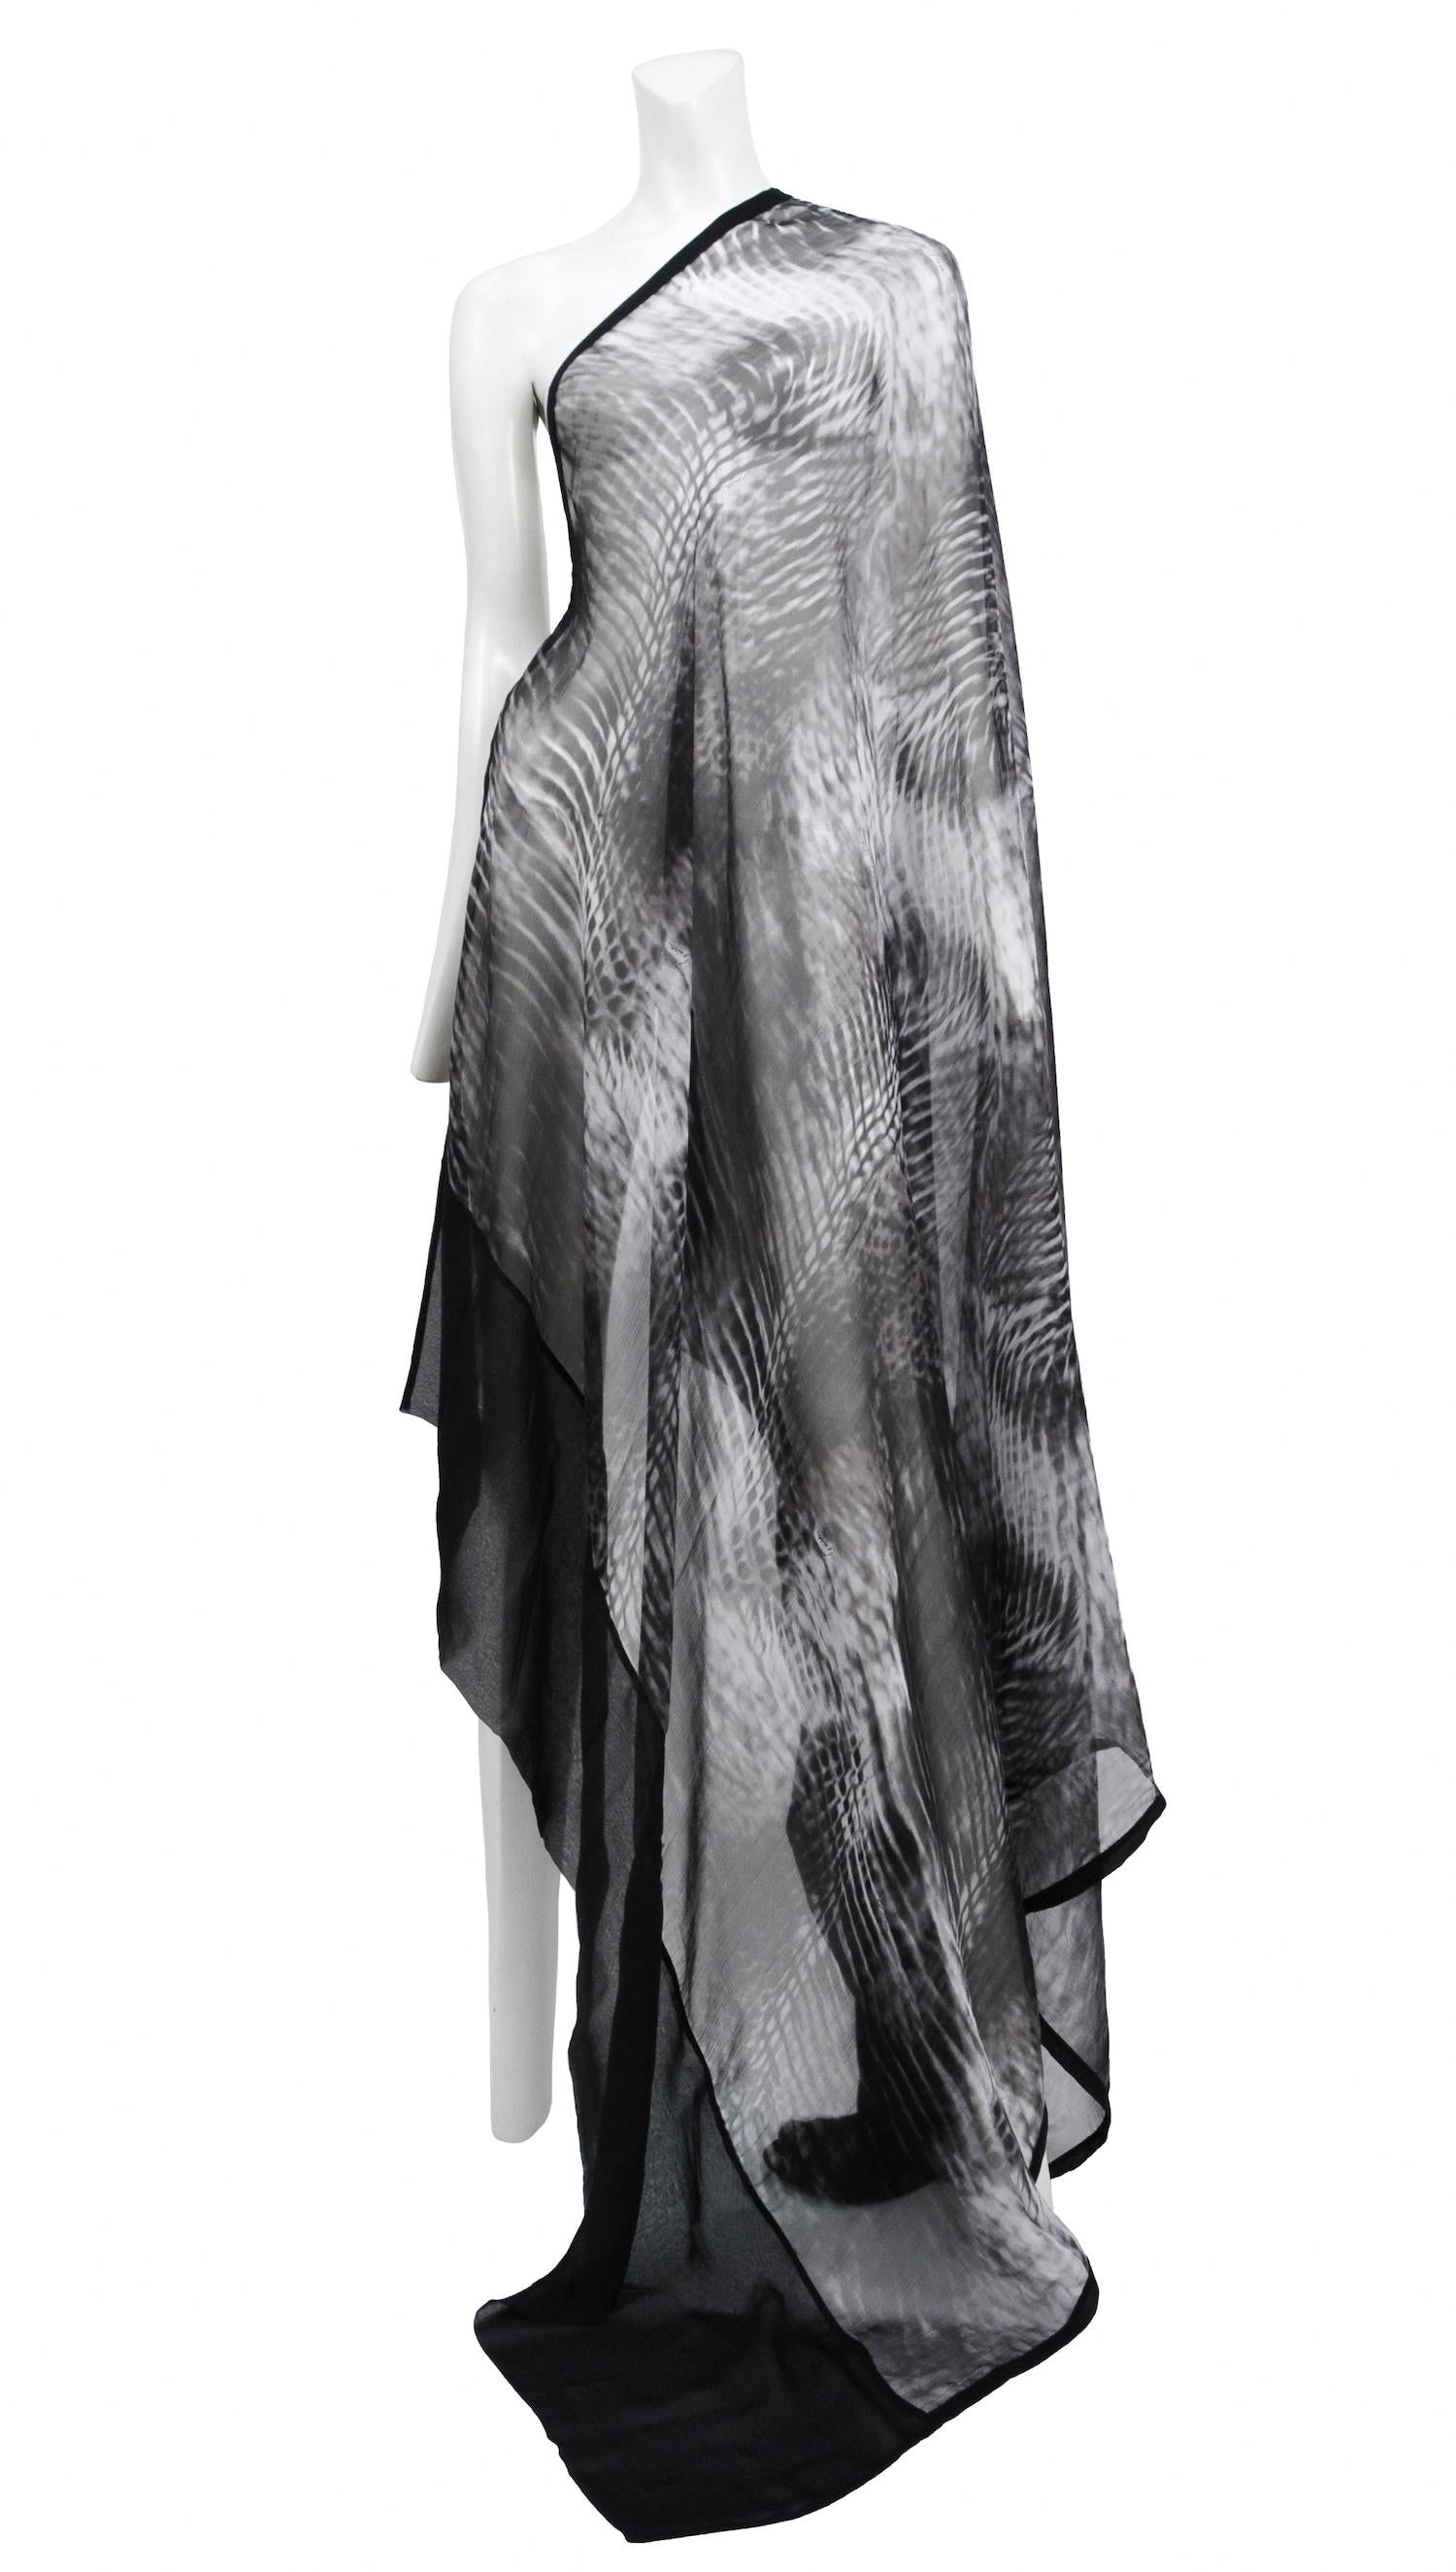 Vintage Tom Ford for Gucci black and white tie-dye print large silk scarf with black border. Circa Spring/Summer 2000